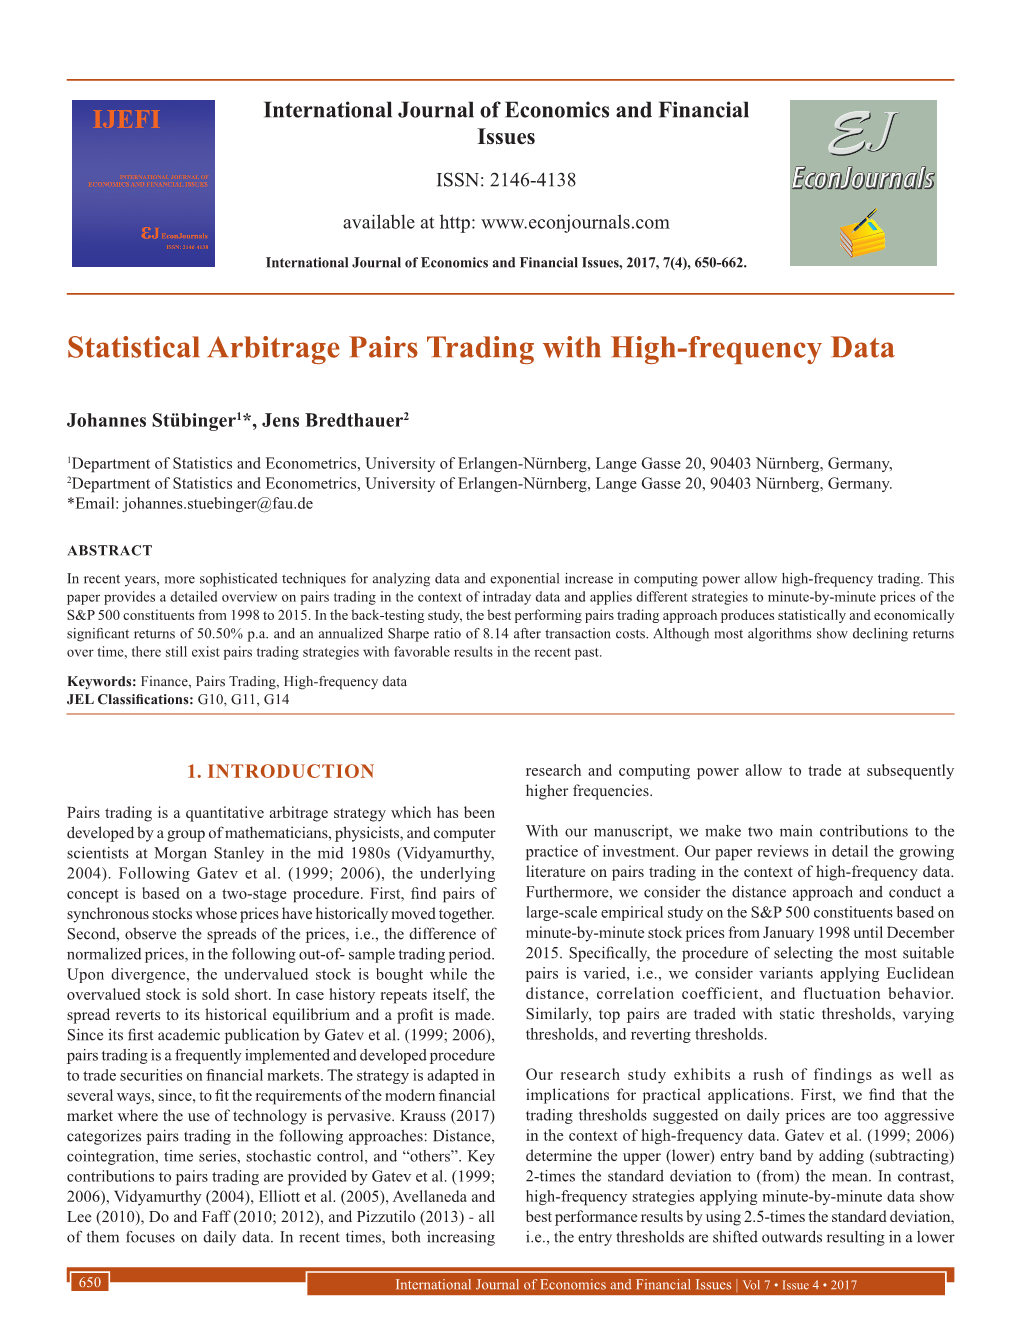 Statistical Arbitrage Pairs Trading with High-Frequency Data